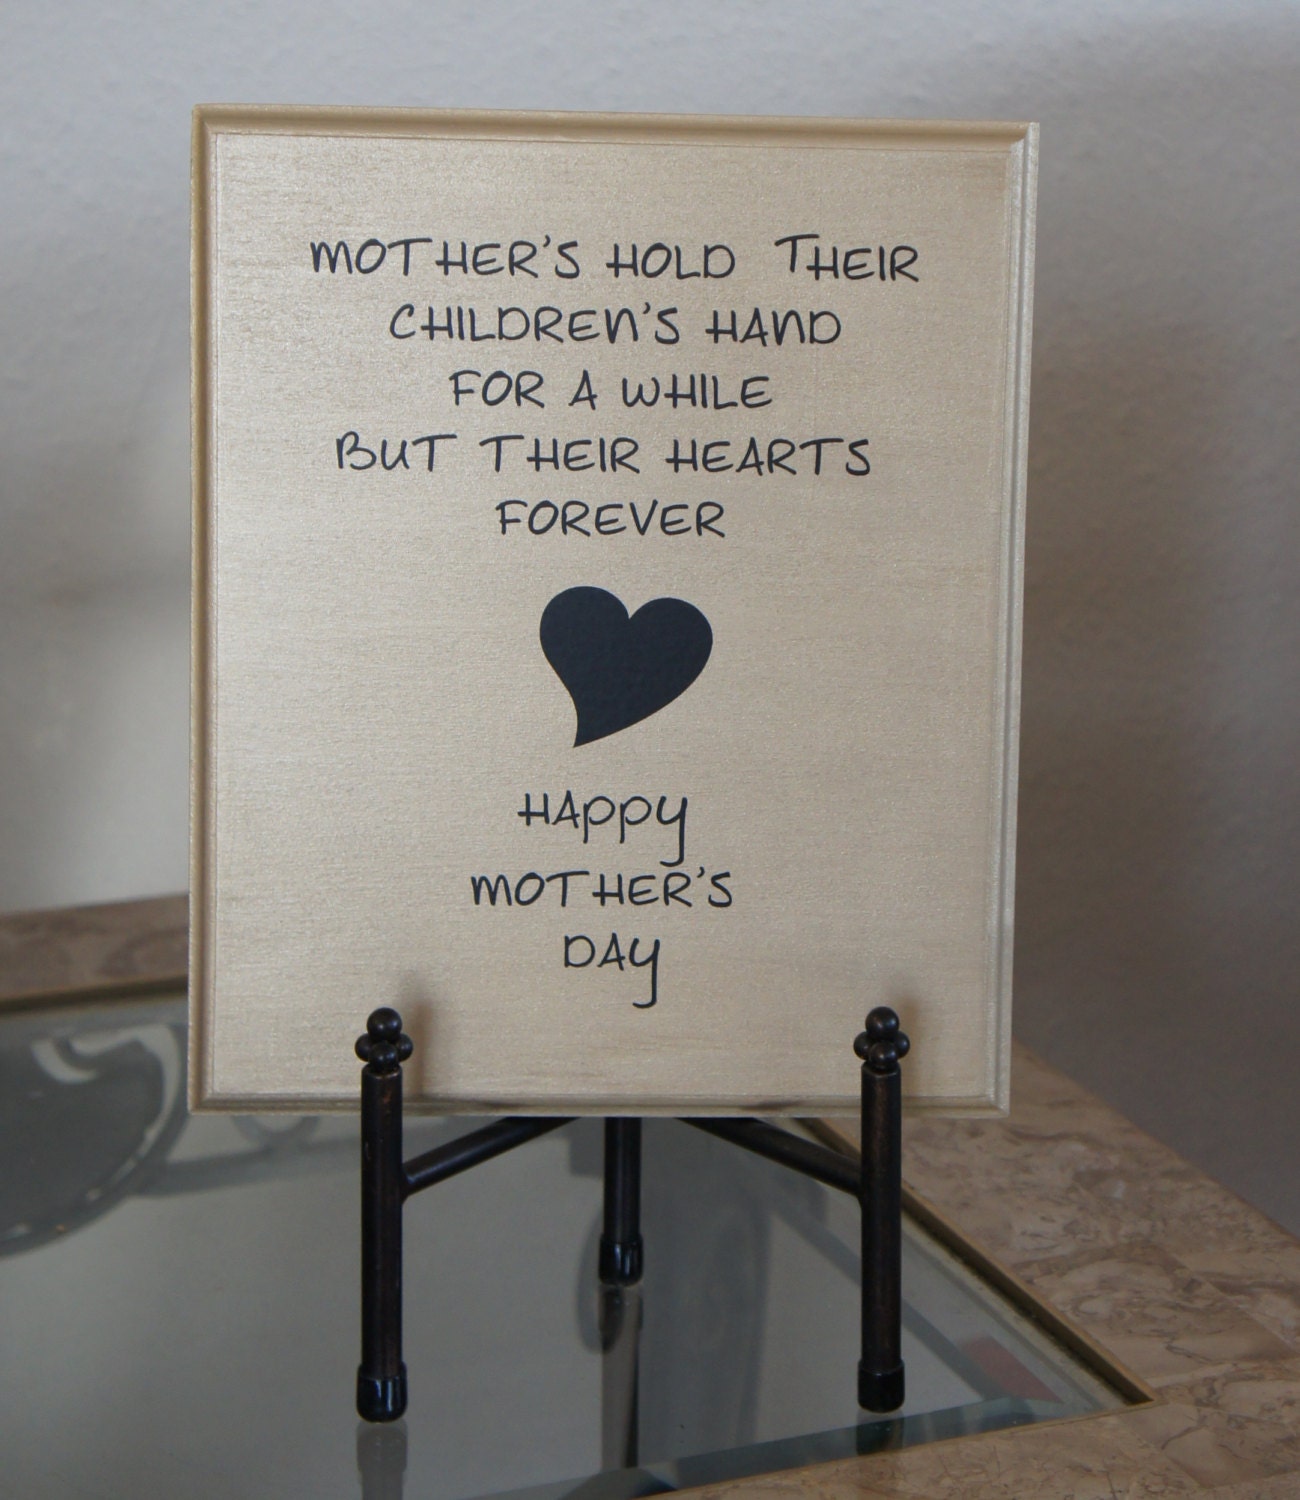 happy-mother-s-day-sign-plaque-mother-s-hold-their